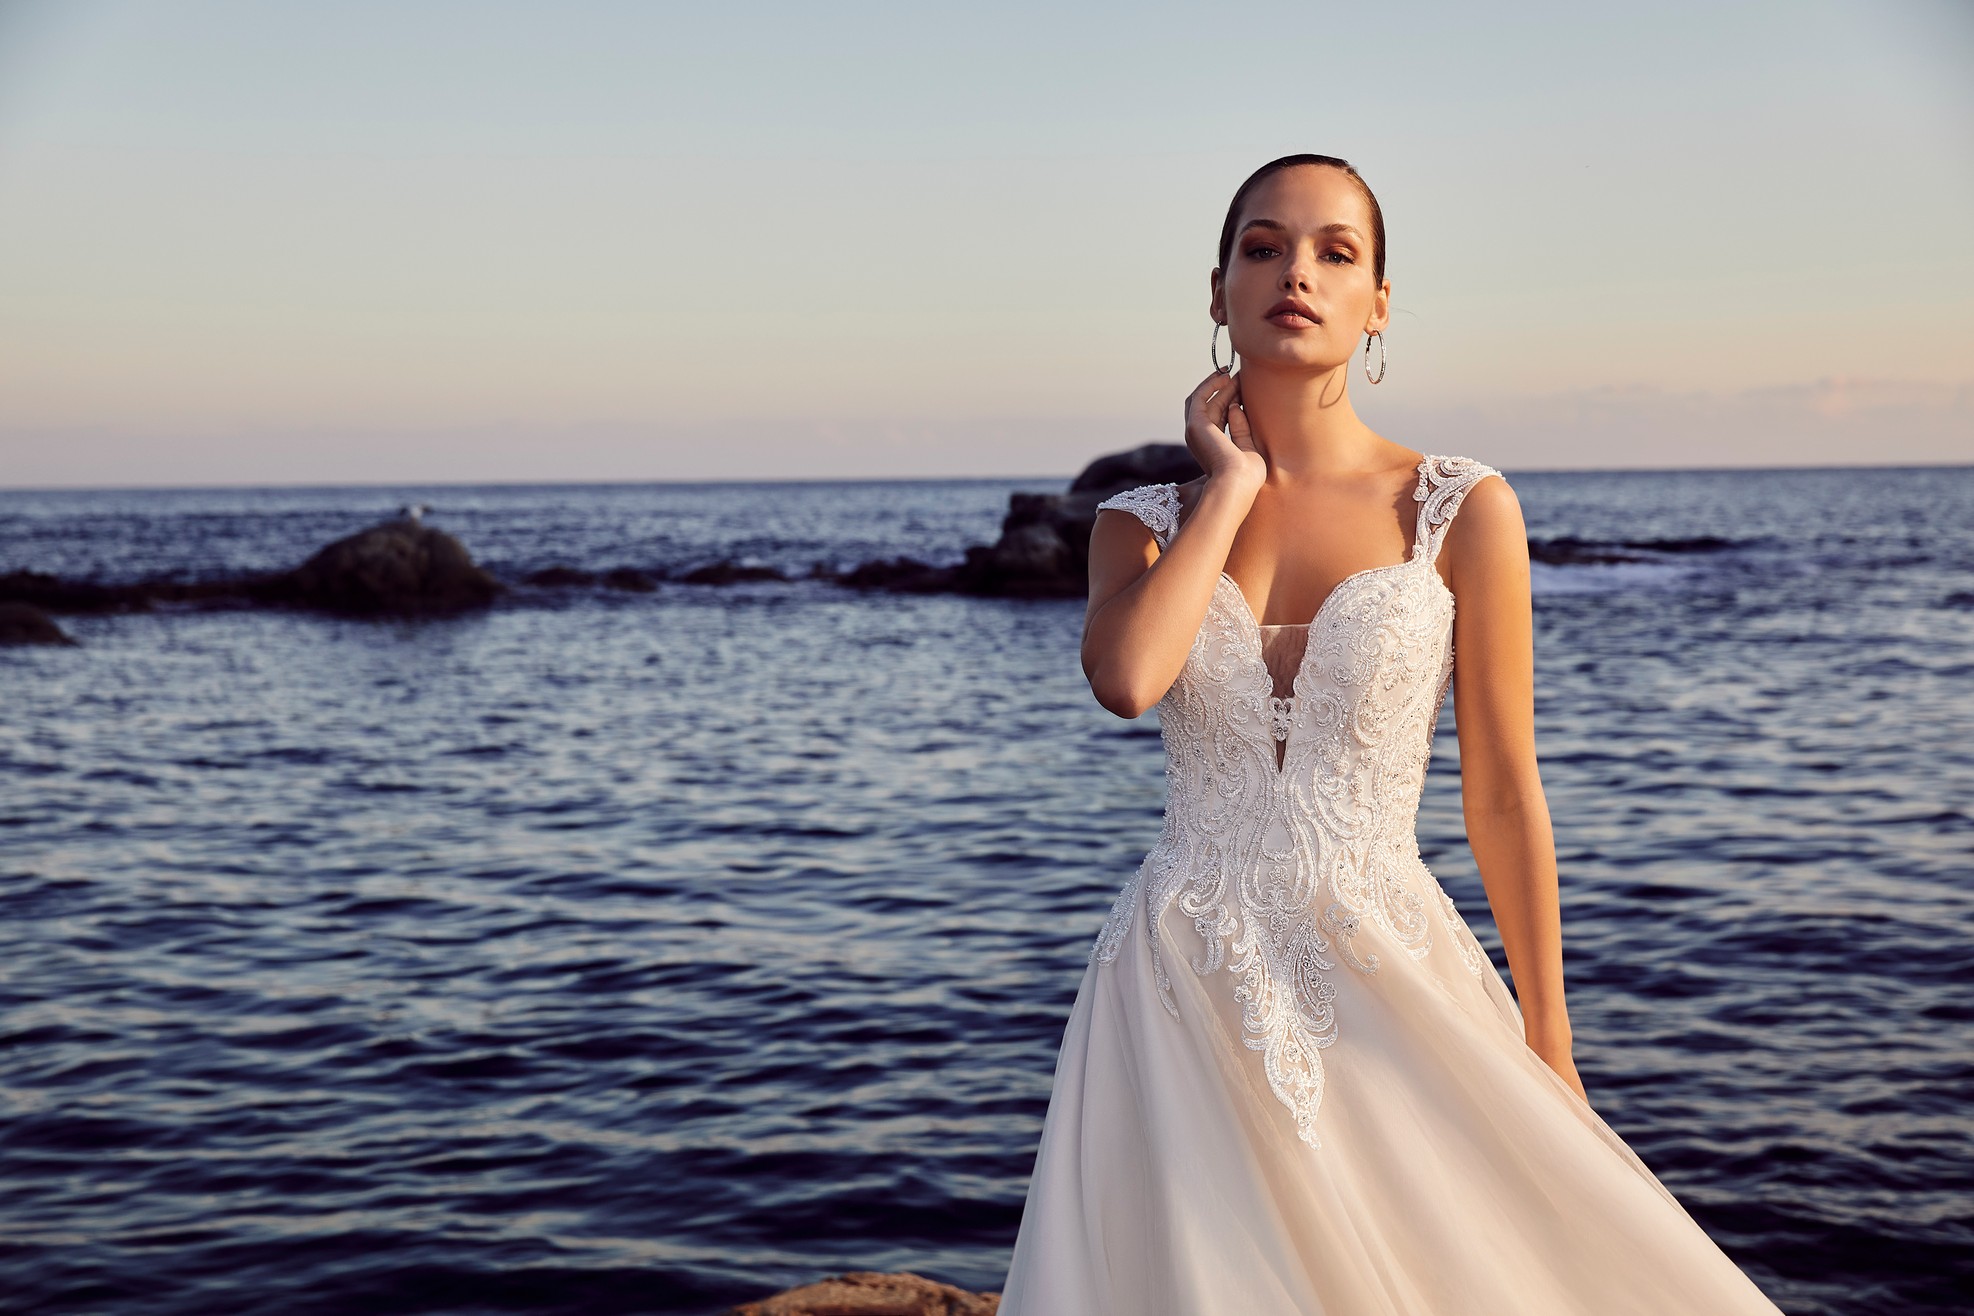 Lady standing on beach next to the sea wearing ballgown wedding dress with lace straps and plunging illusion neckline detail